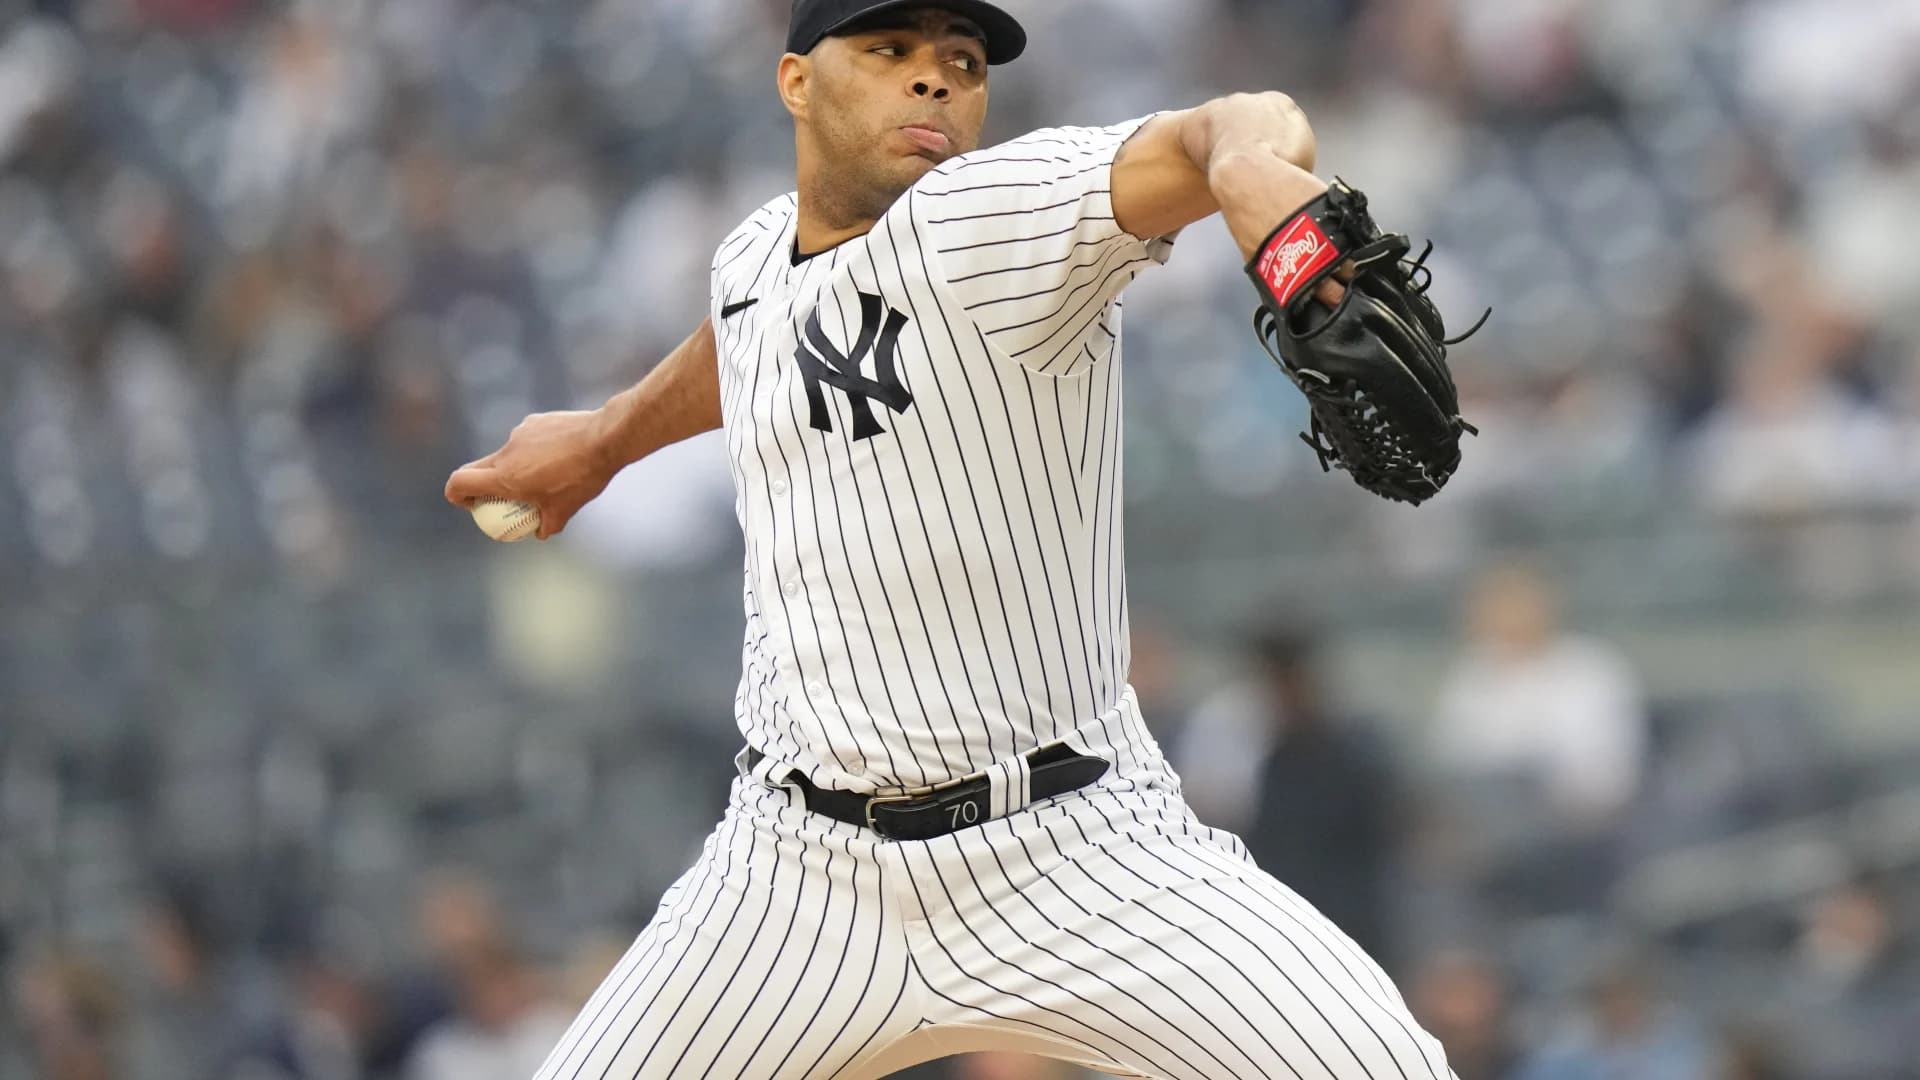 Yankees pitcher Cordero suspended for rest of season under domestic violence policy